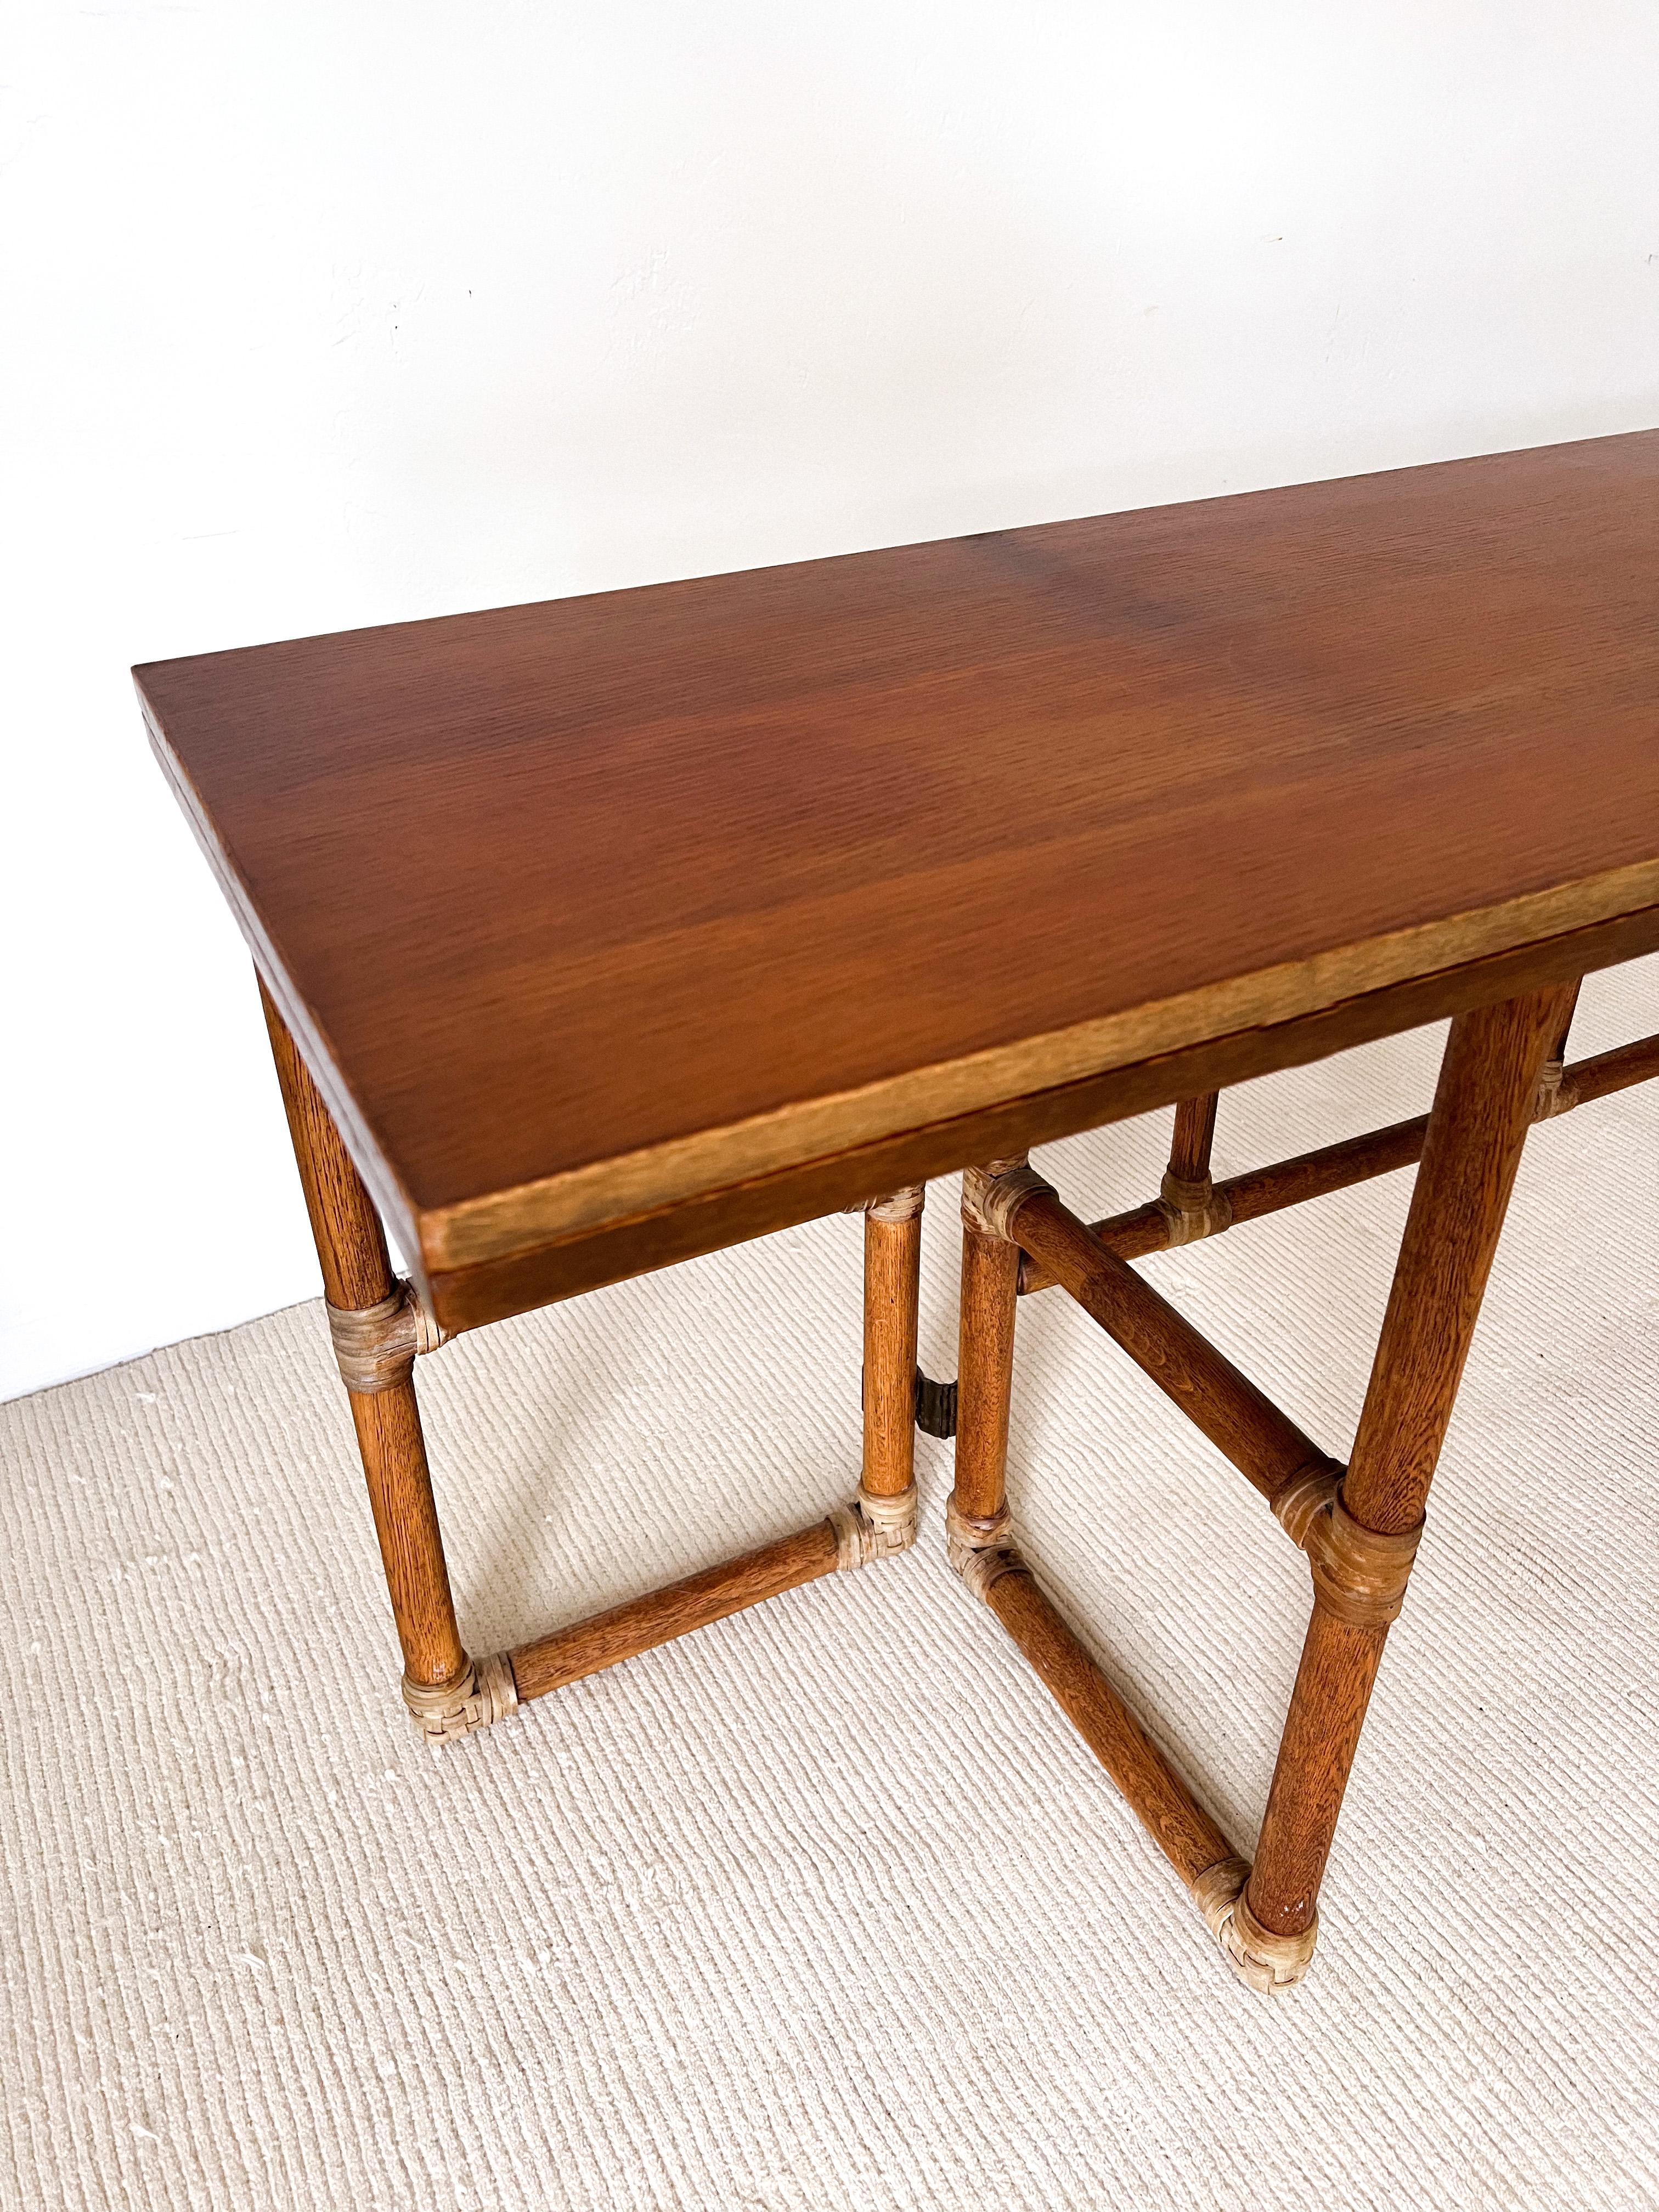 1970s Bamboo Flip-Top Dining Table by McGuire 1